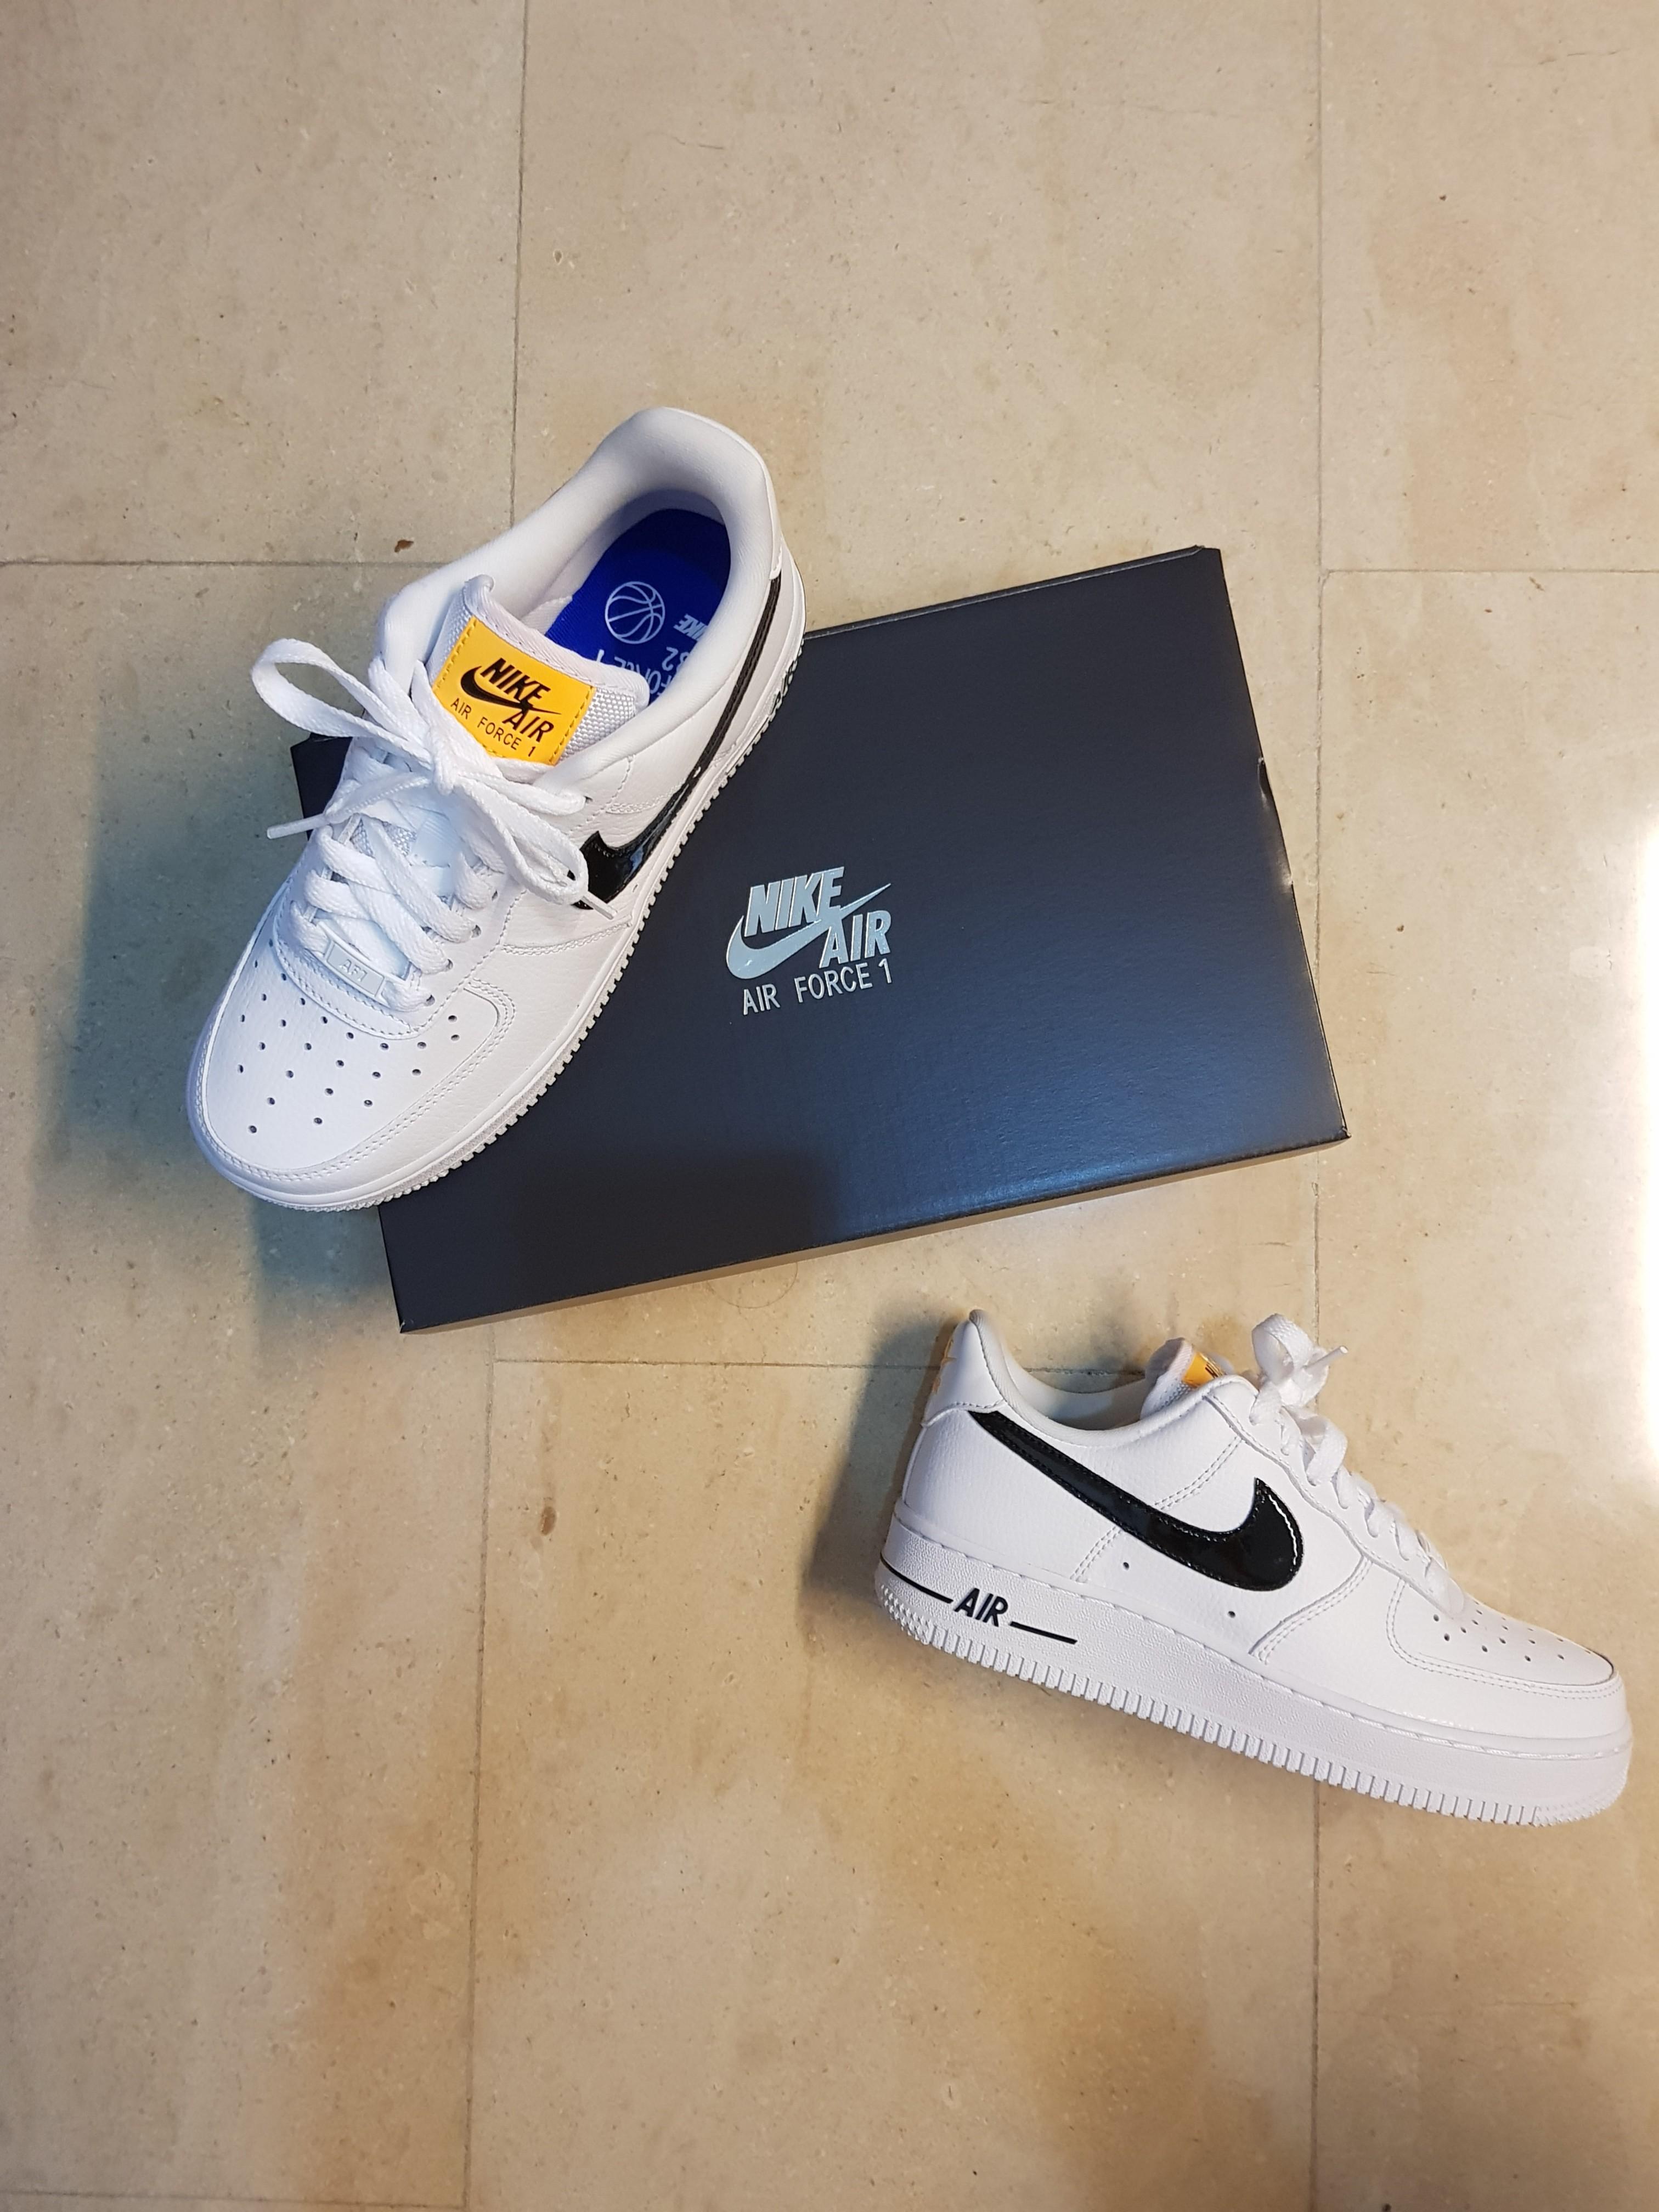 Nike Air Force 1 (Limited Edition 